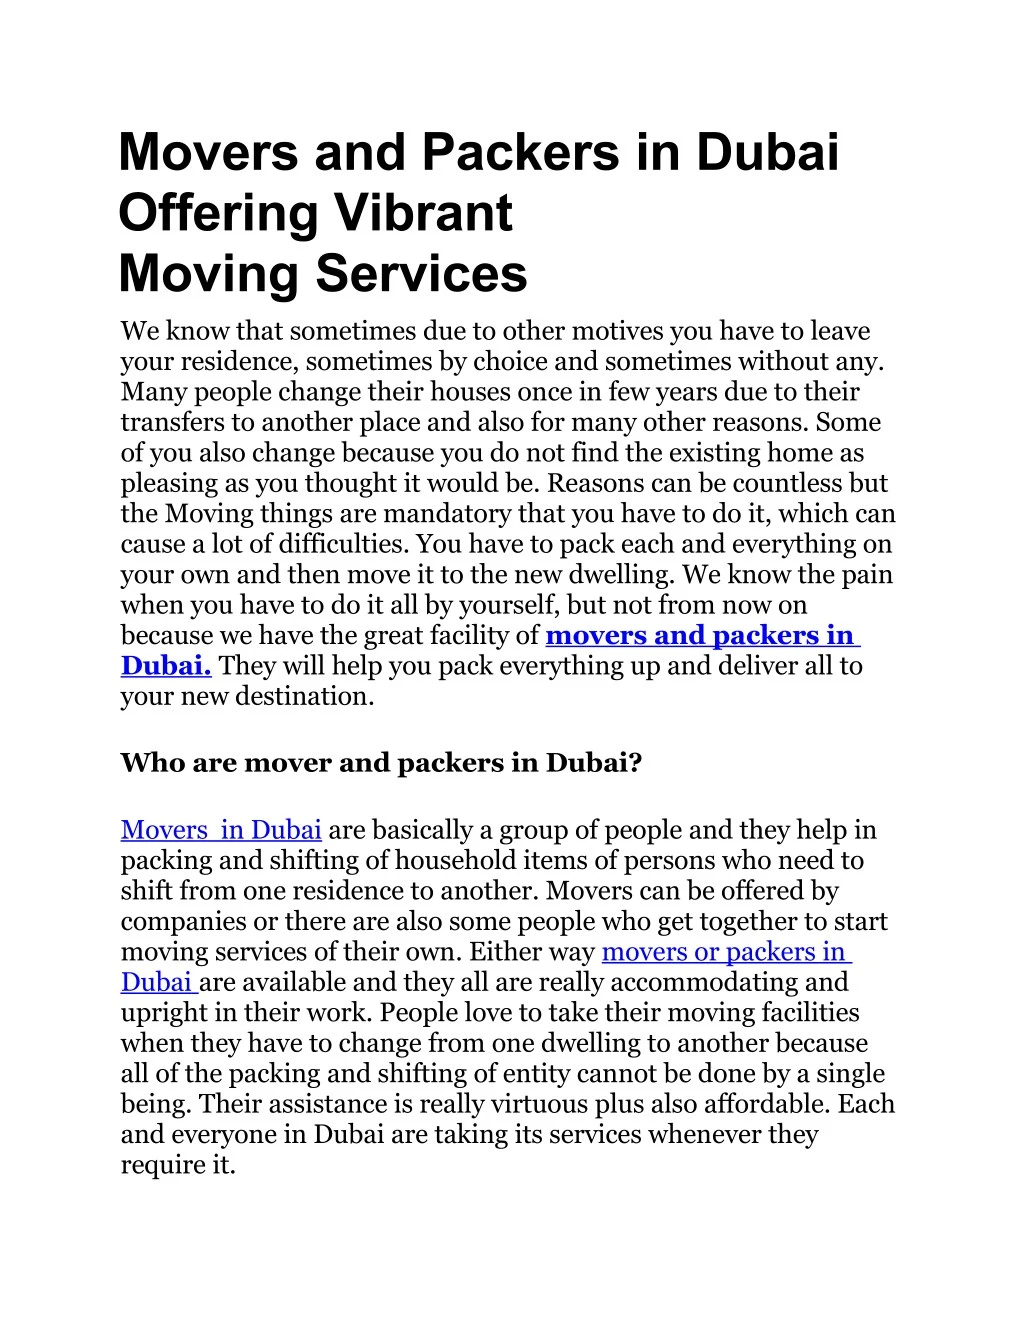 movers and packers in dubai offering vibrant